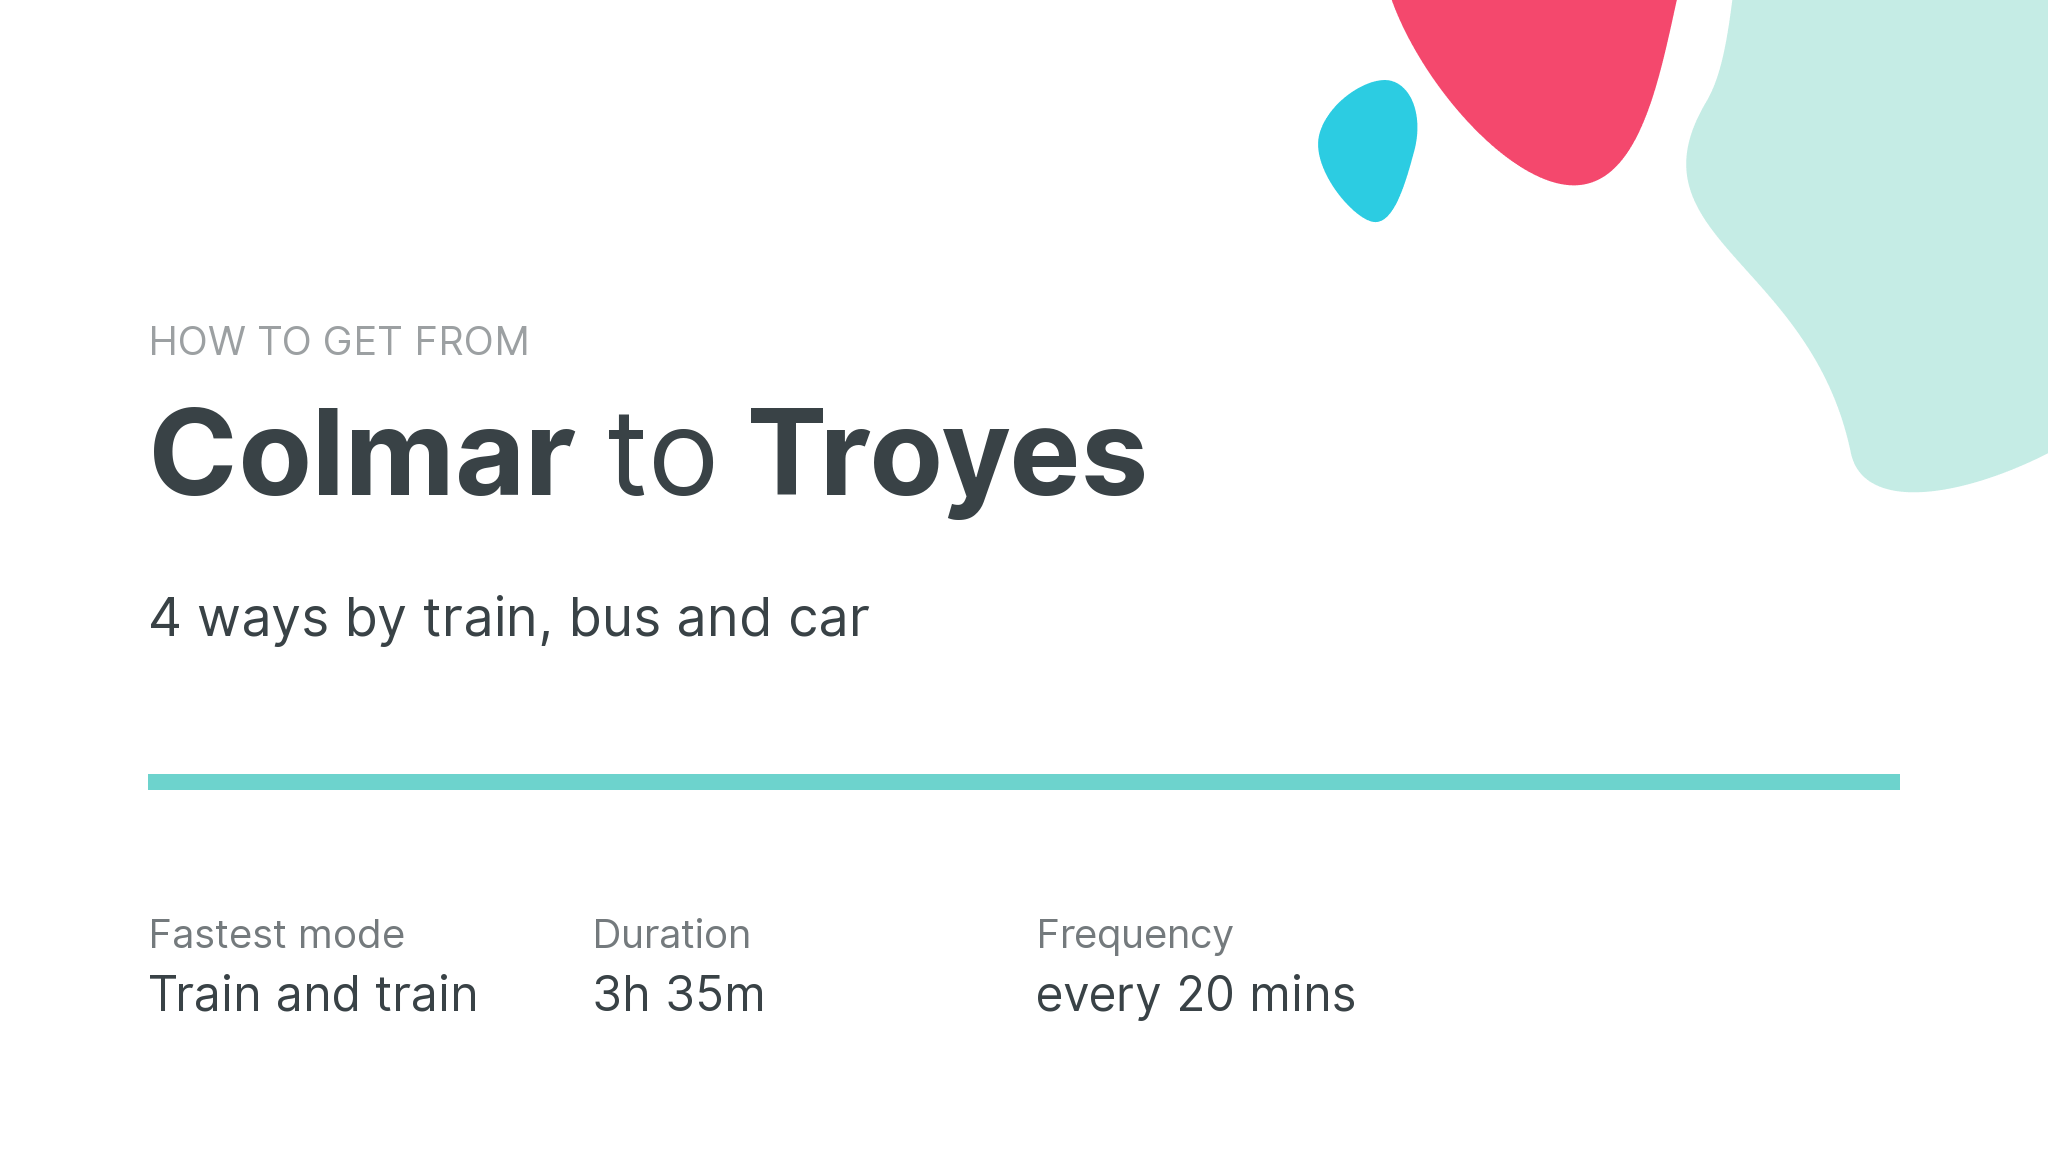 How do I get from Colmar to Troyes